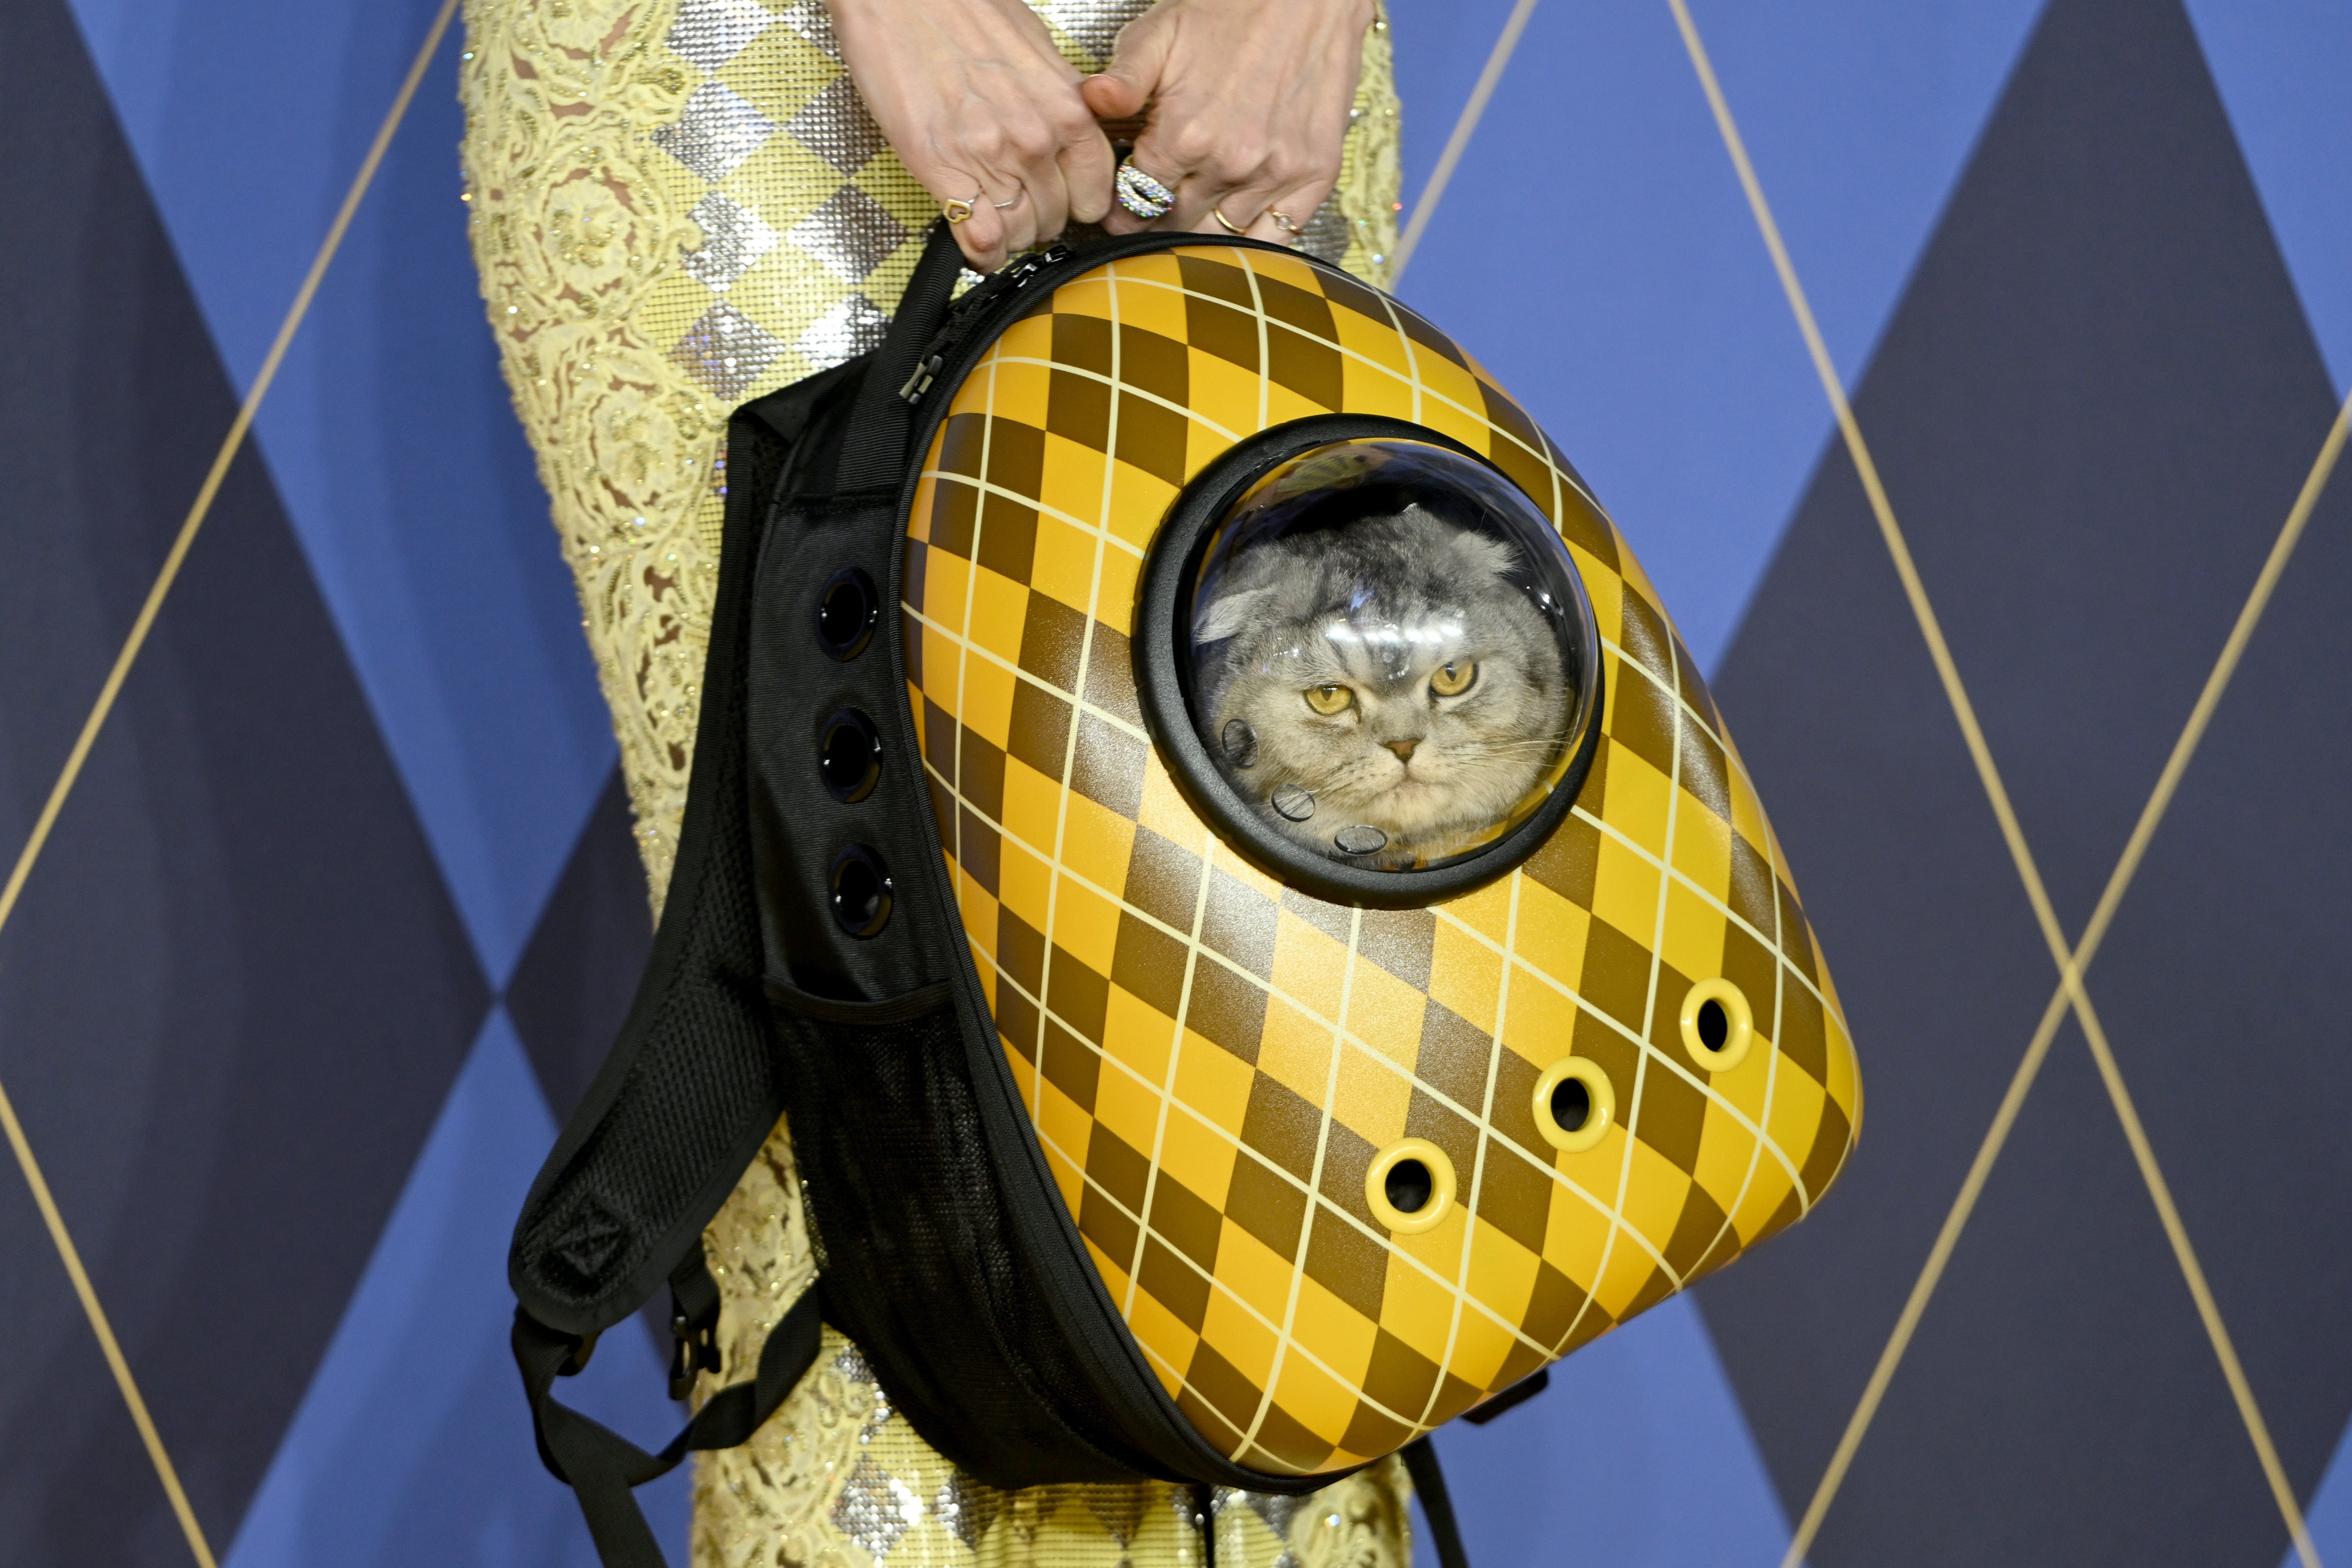 Animal-welfare organisations advised against transporting cats in backpacks, as the pet Chip is in the film Argylle